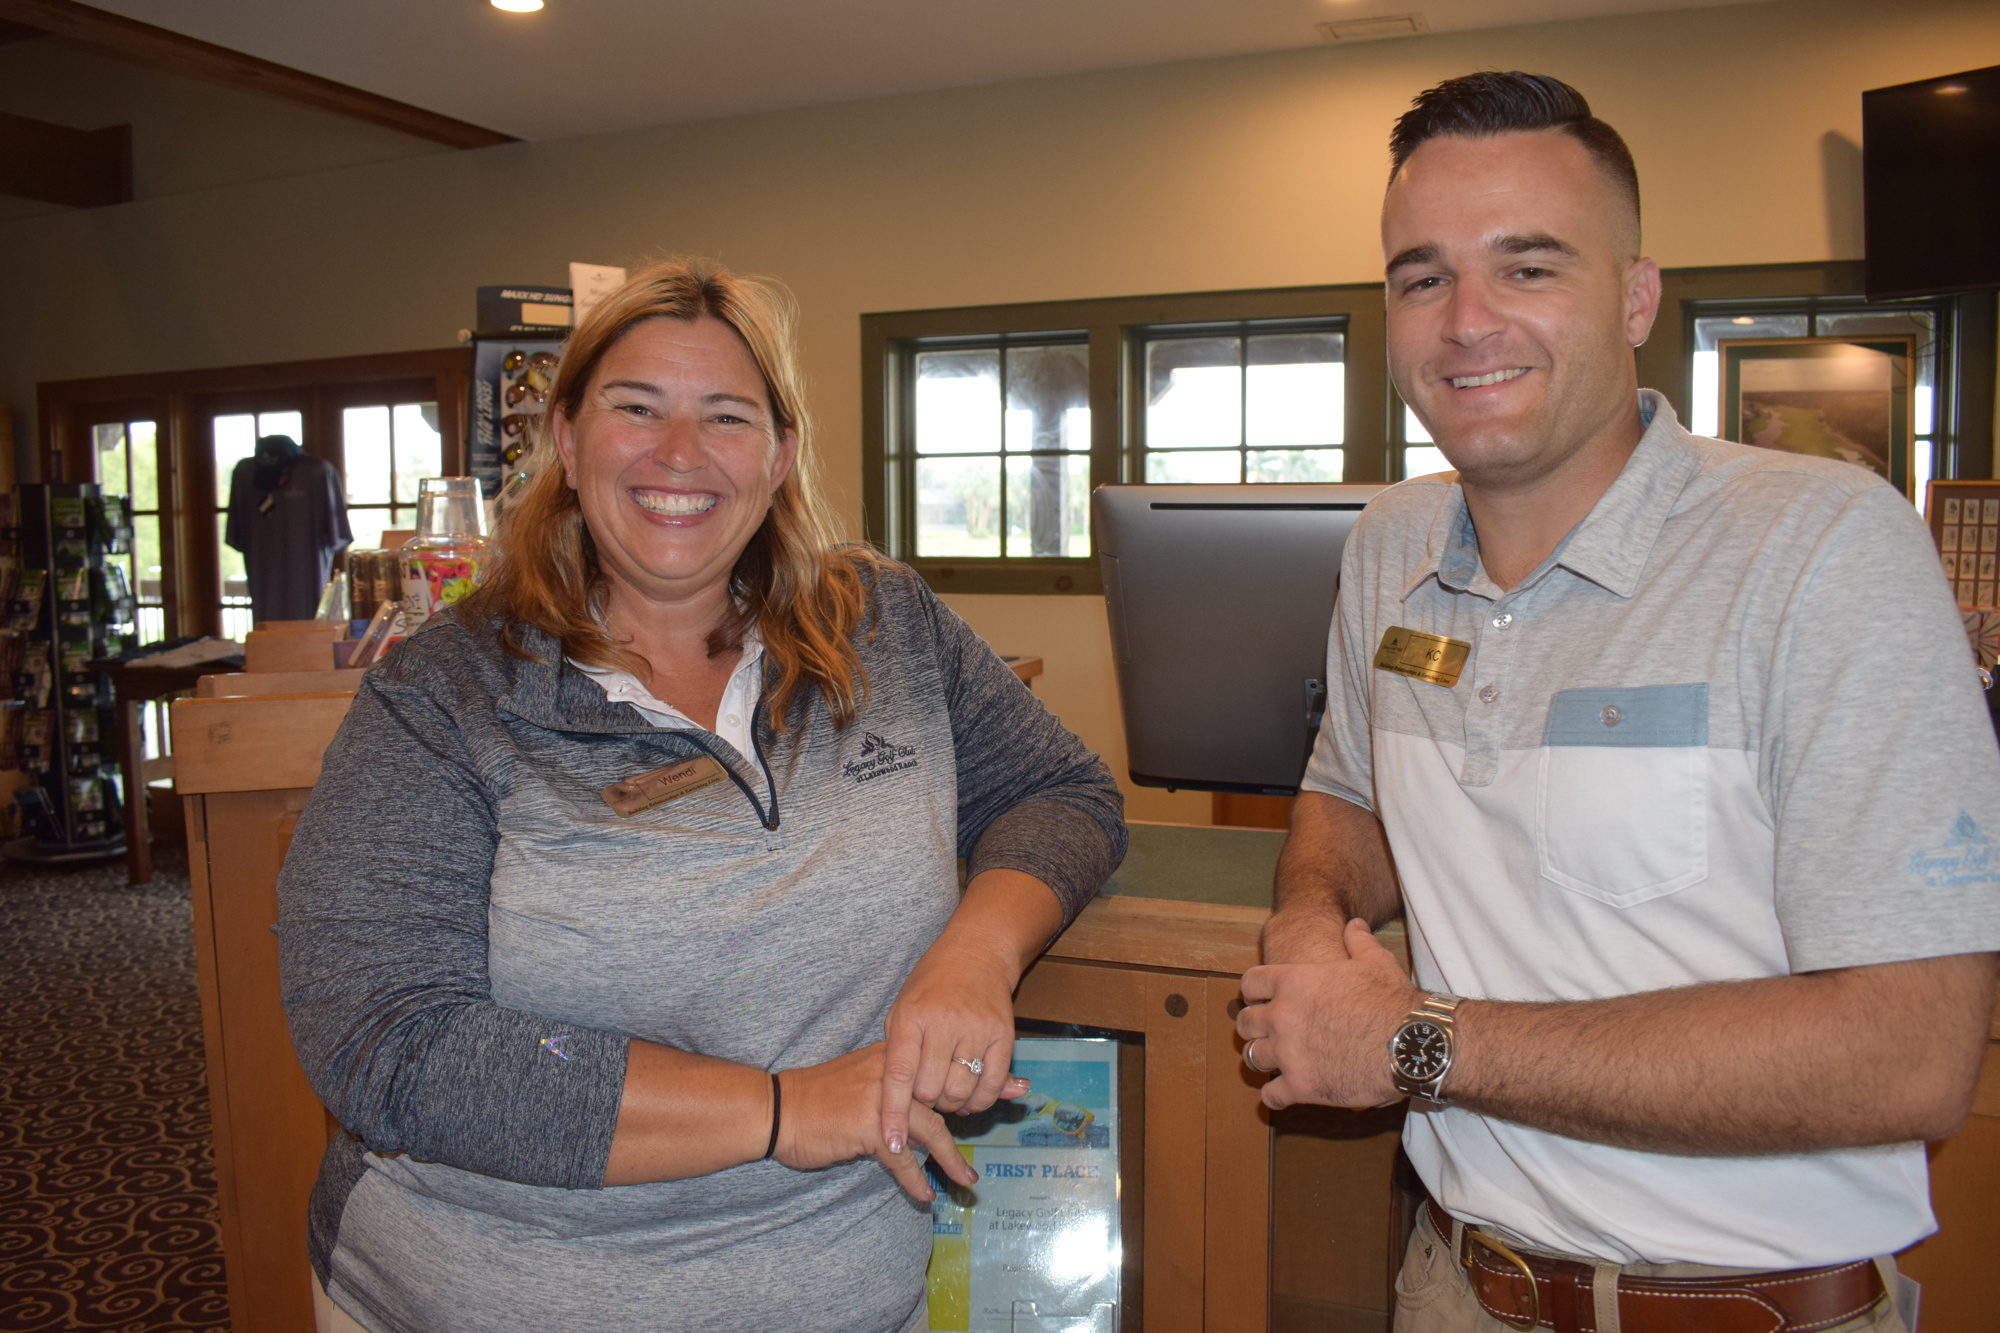 Head pro Wendi Patterson and assistant pro K.C. Bartlett will spearhead the effort to give better customer service.